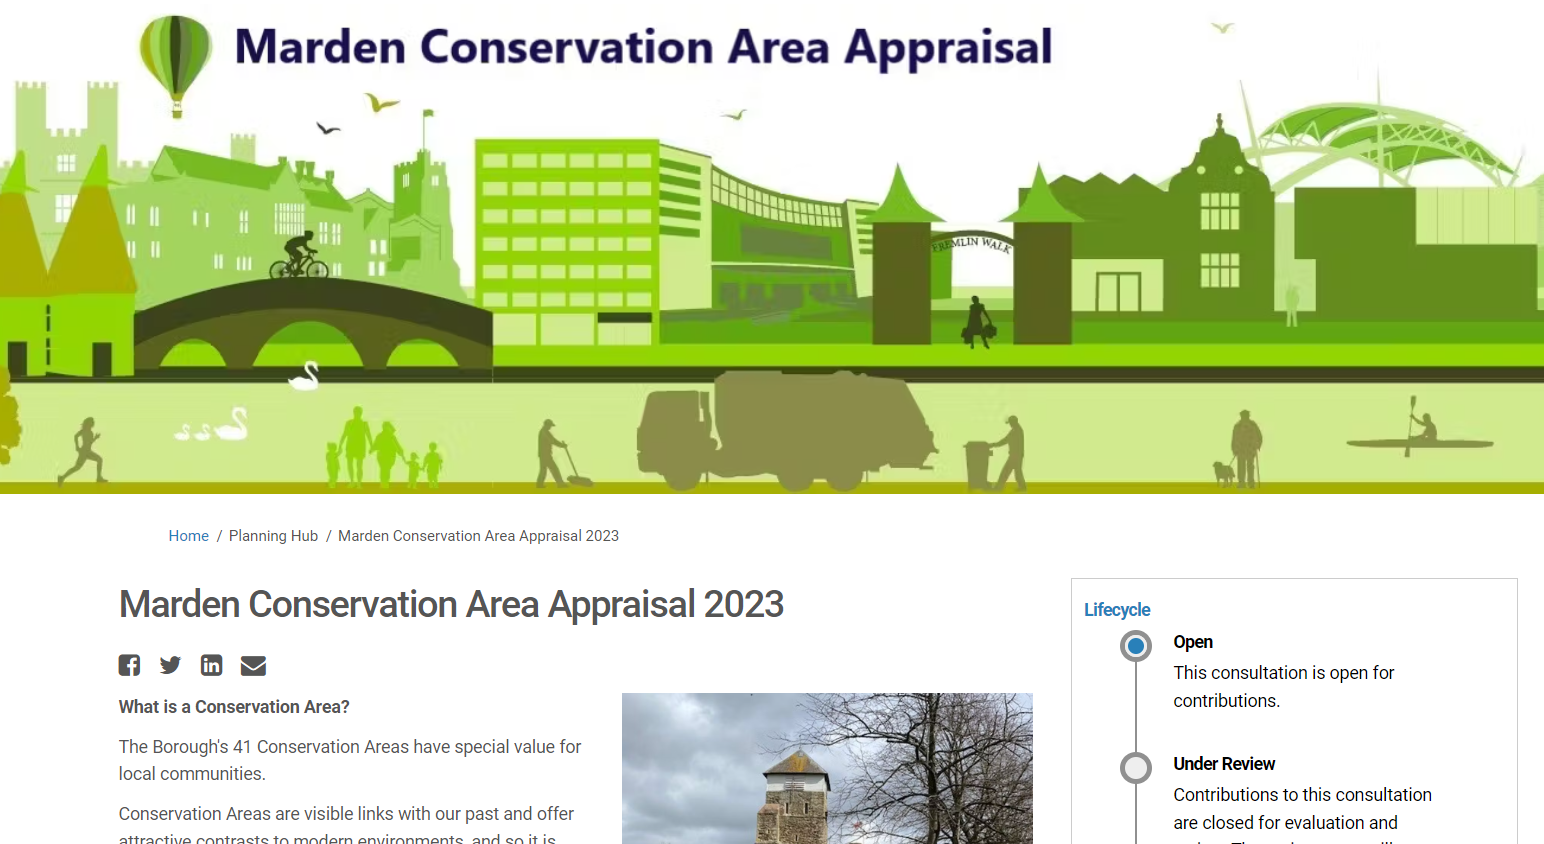 Have your say on Marden conservation area